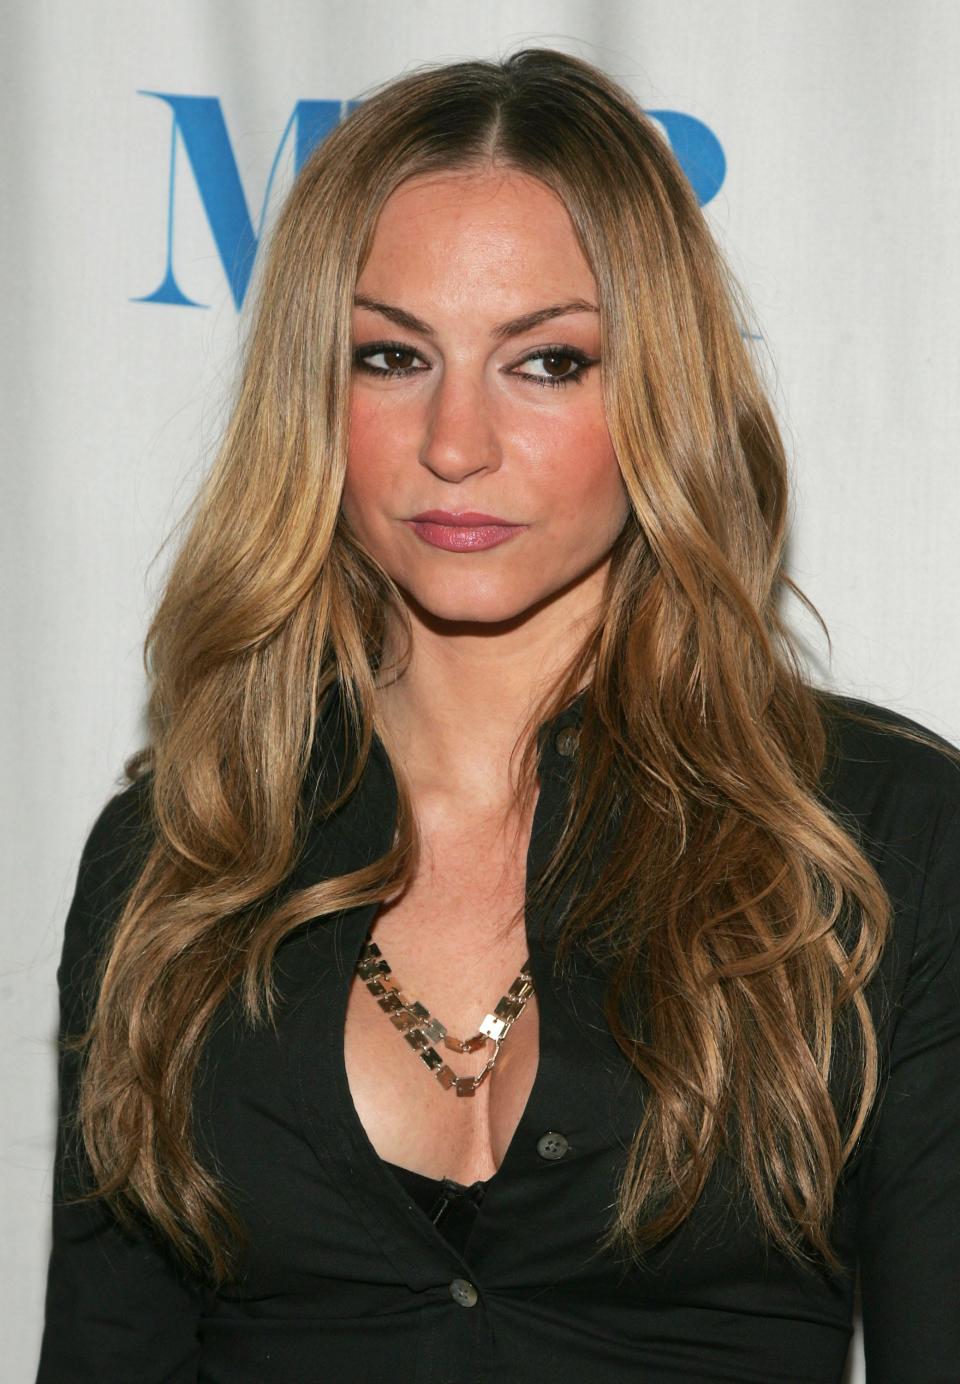 Drea de Matteo joined OnlyFans in August after being unable to book jobs amid the COVID-19 pandemic.